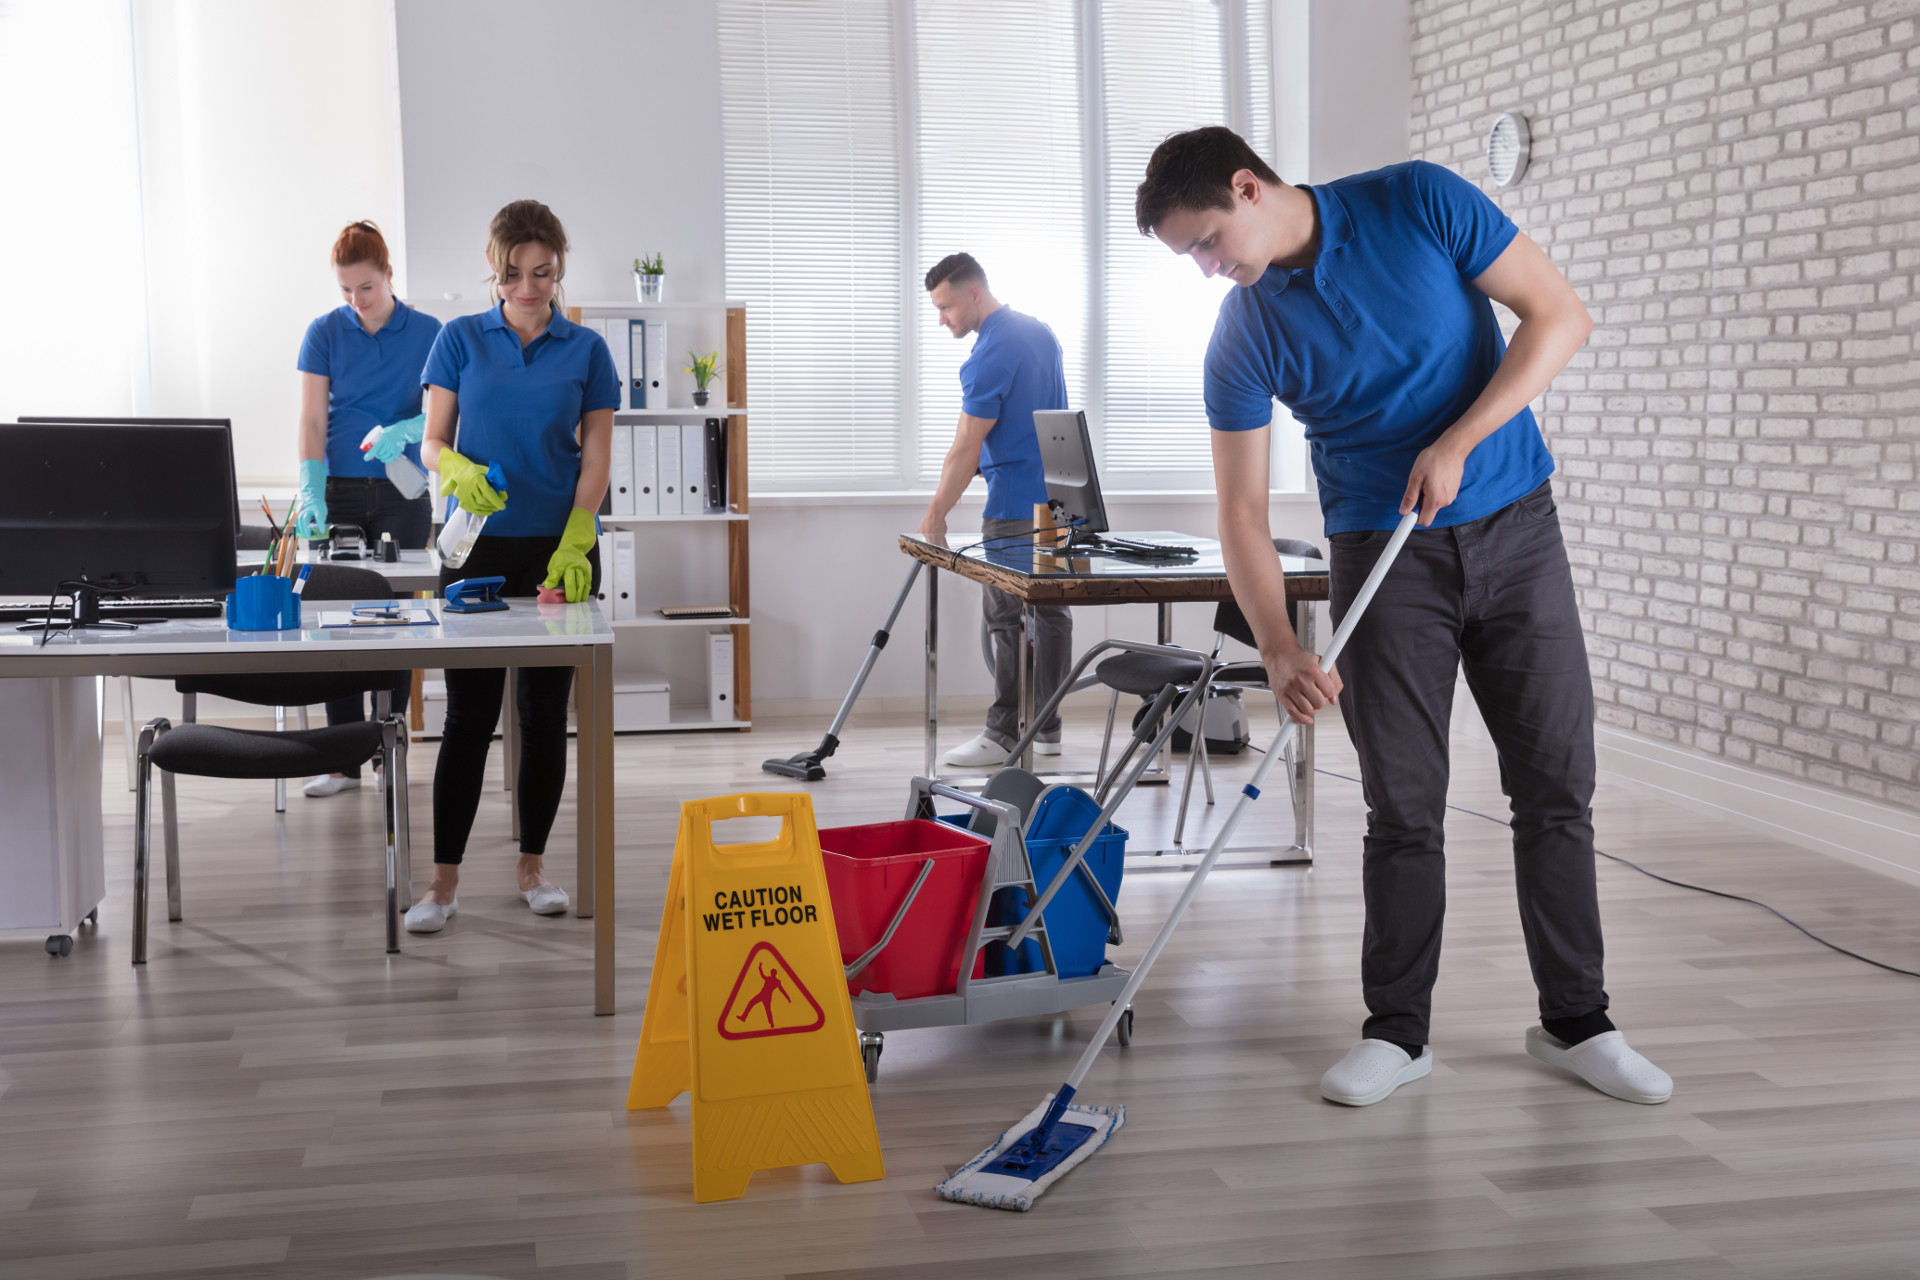 What Is The Average Price For Office Cleaning By The Square Foot